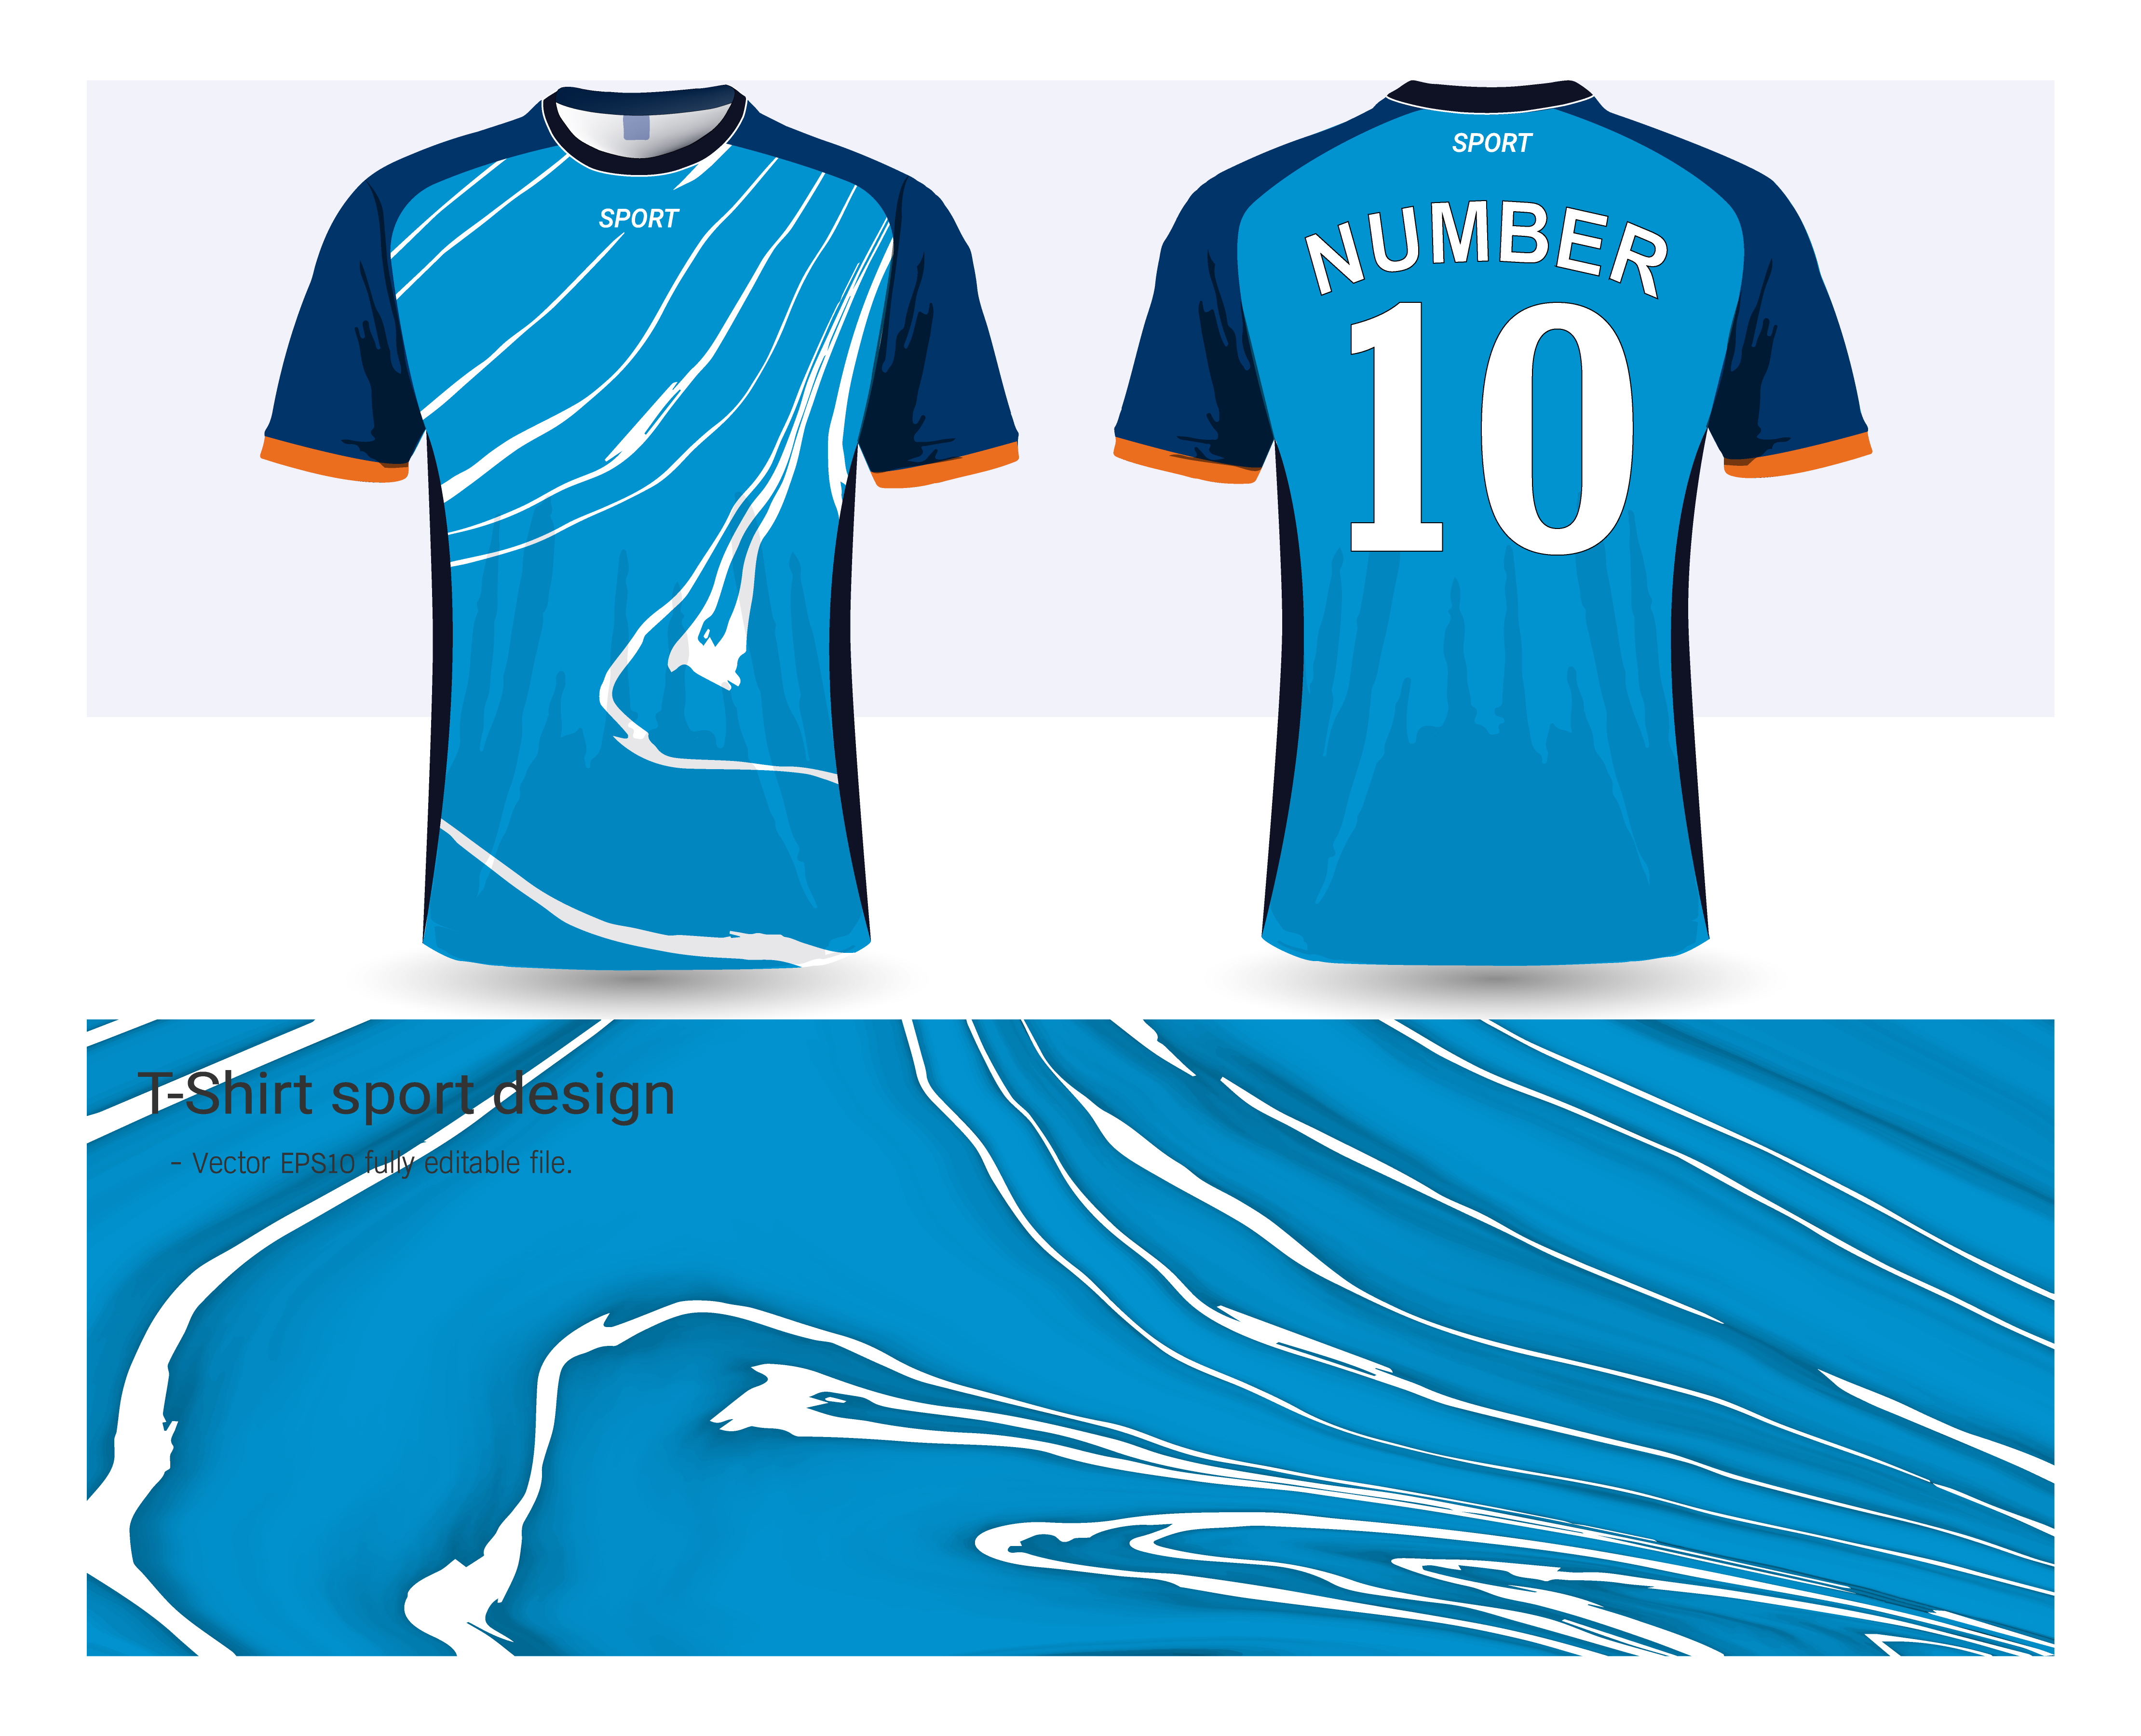 soccer-jersey-and-t-shirt-sport-mockup-template-graphic-design-for